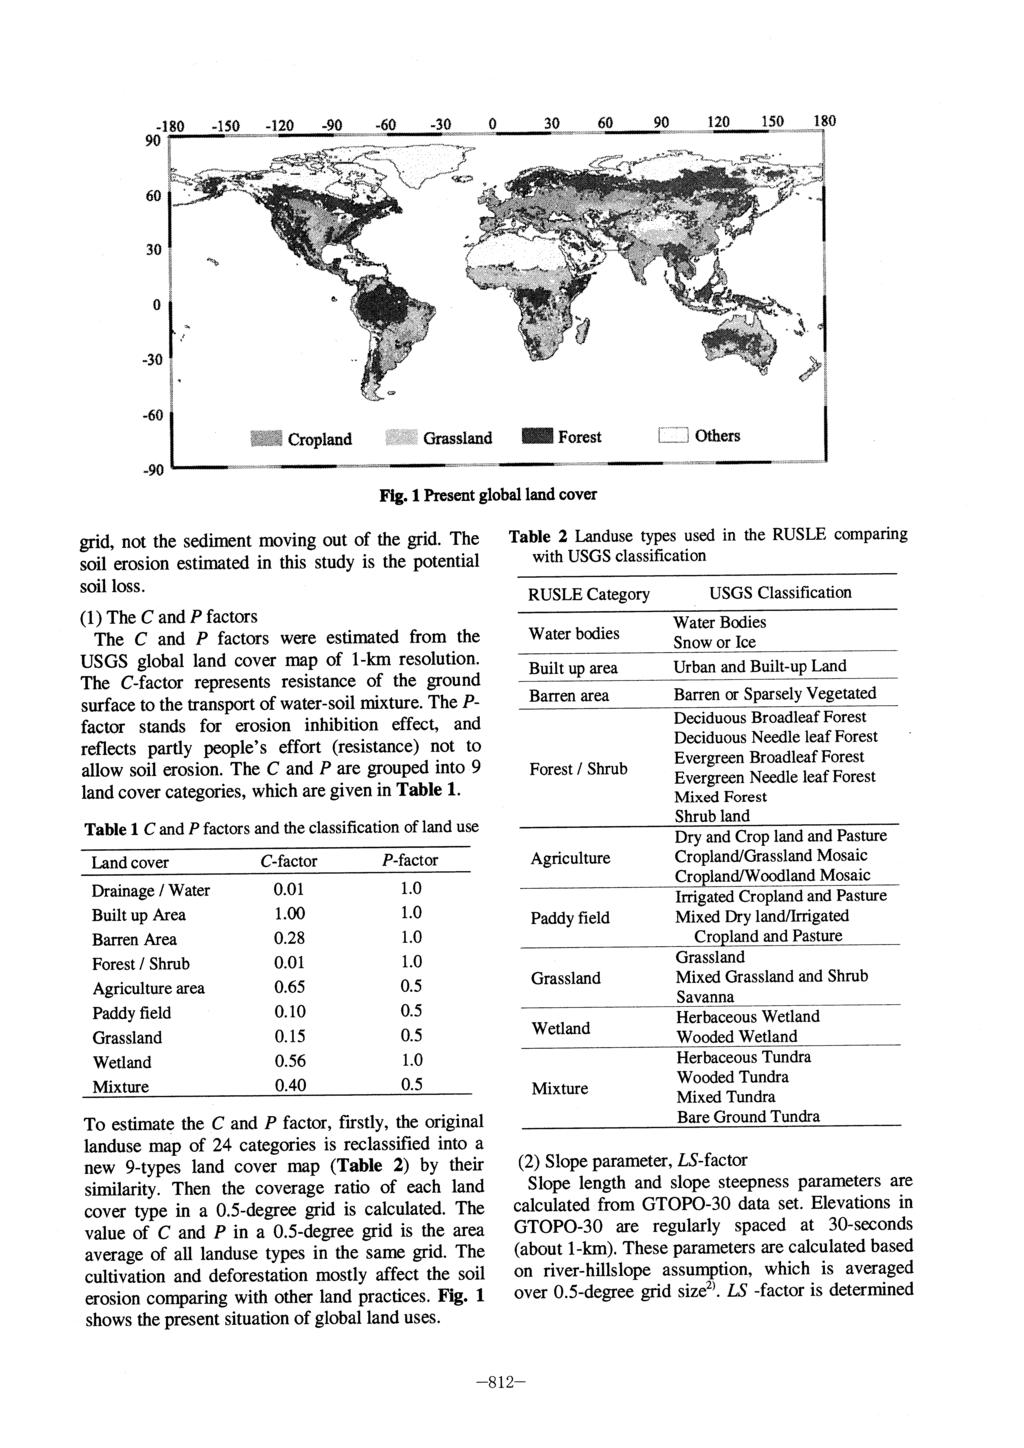 Fig. 1 Present global land cover grid, not the sediment moving out of the grid. The soil erosion estimated in this study is the potential soil loss.